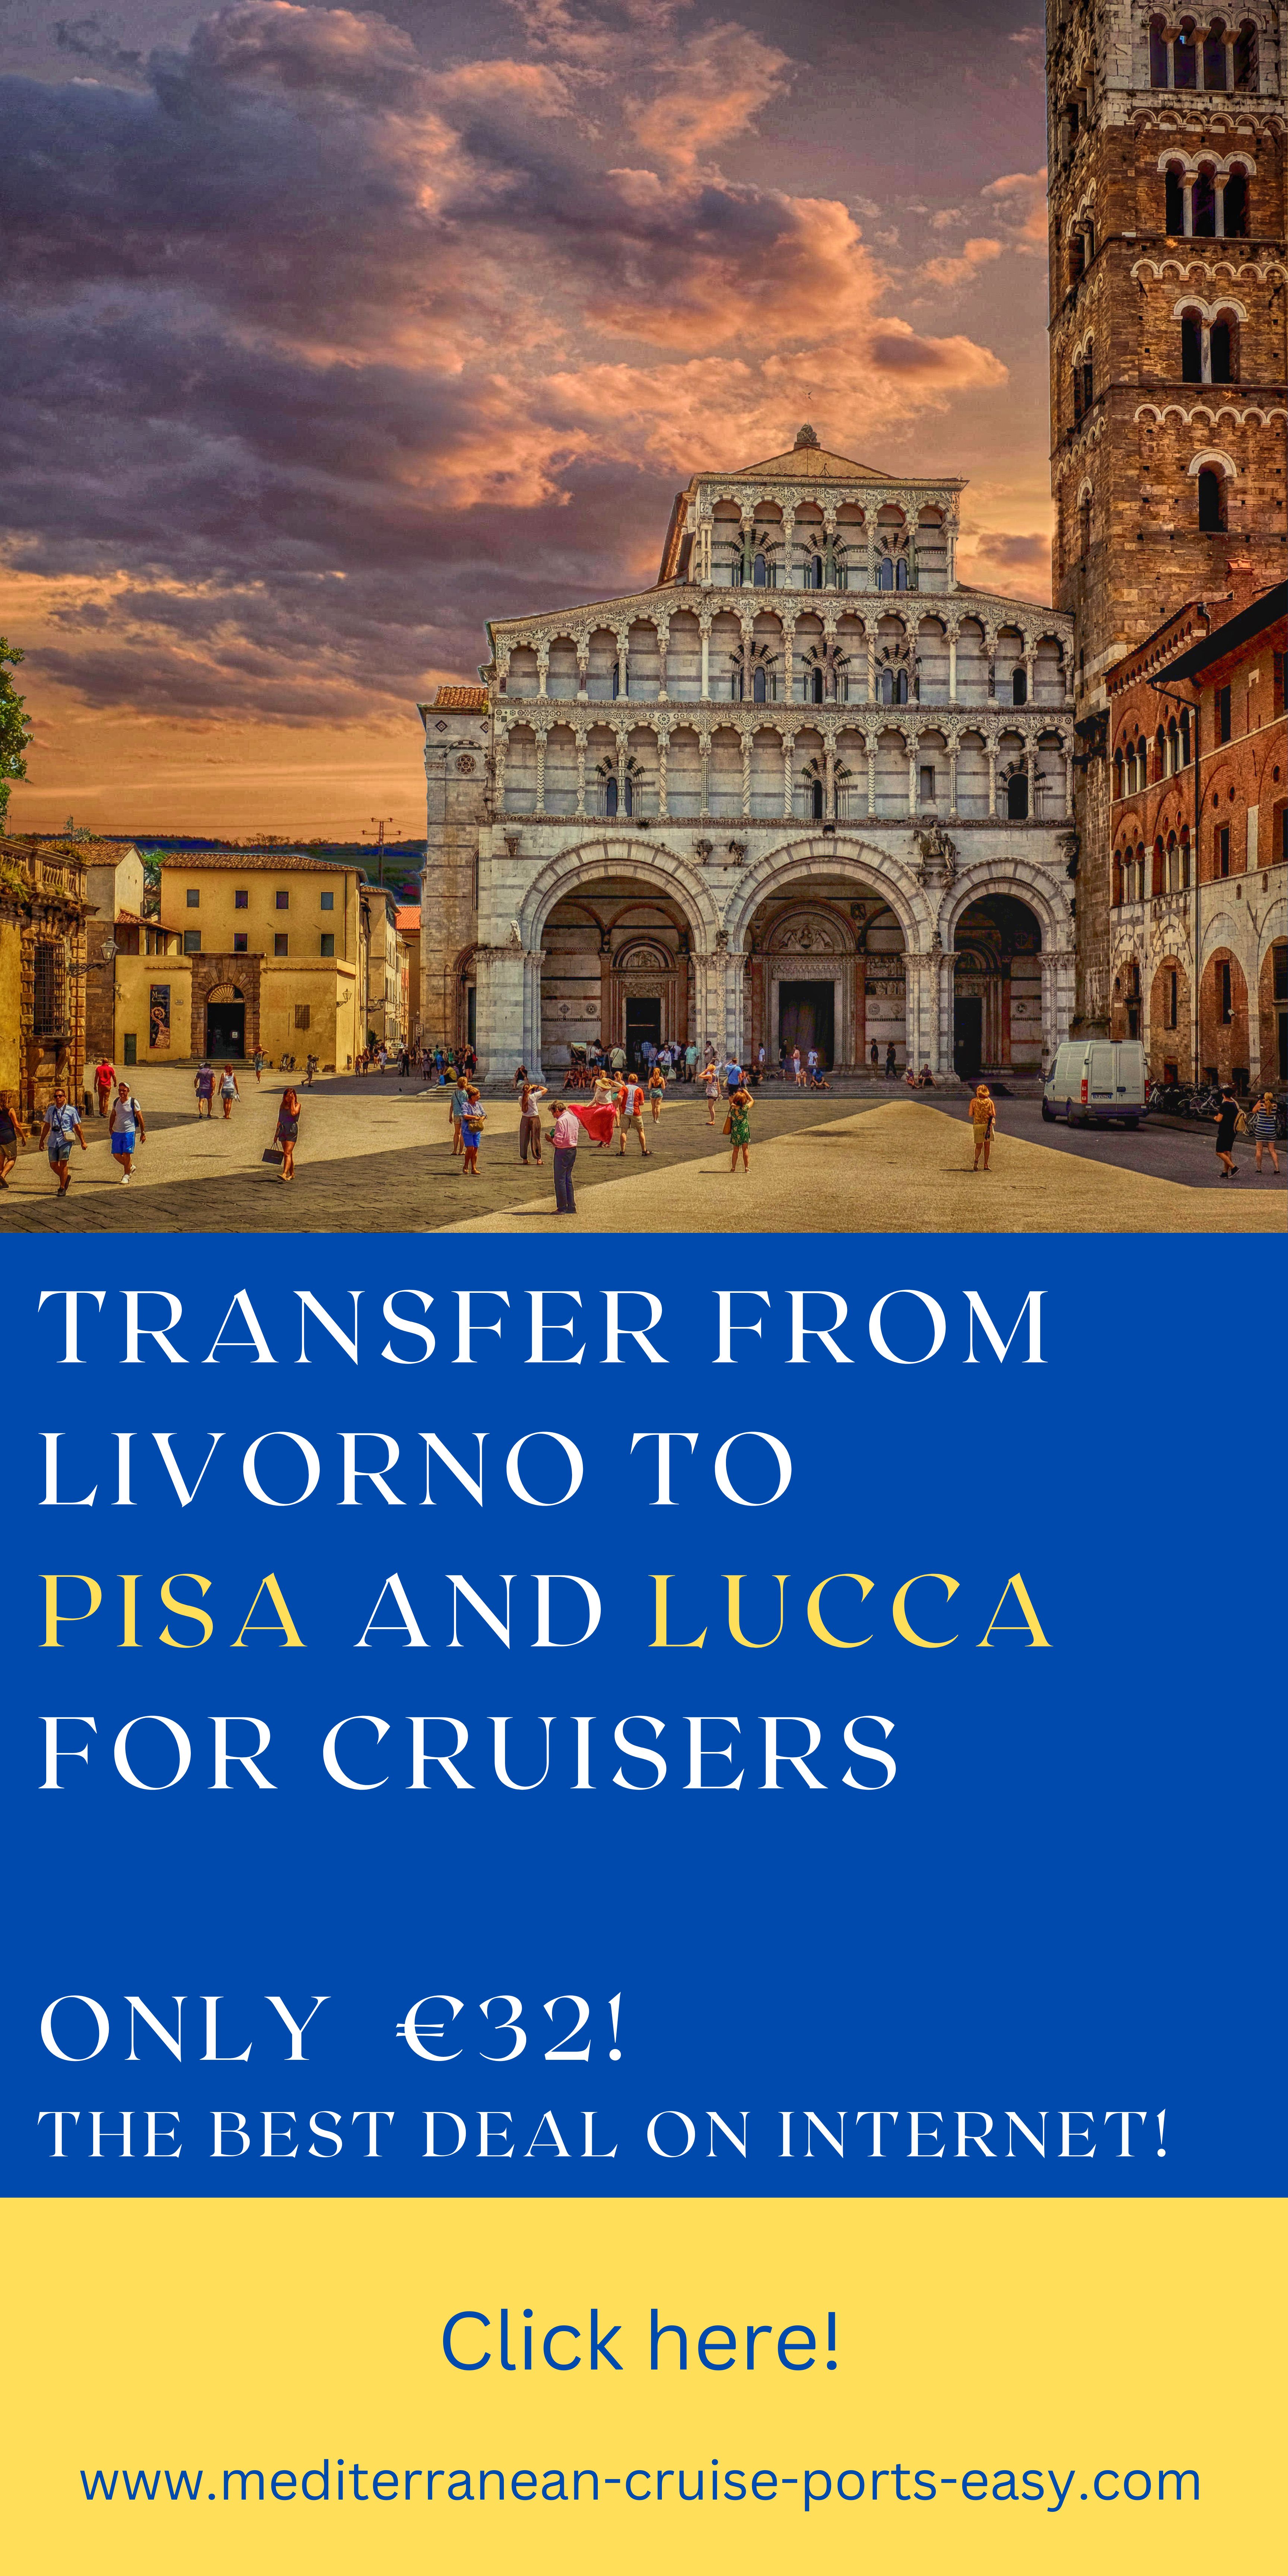 Livorno to Pisa and Lucca in a day